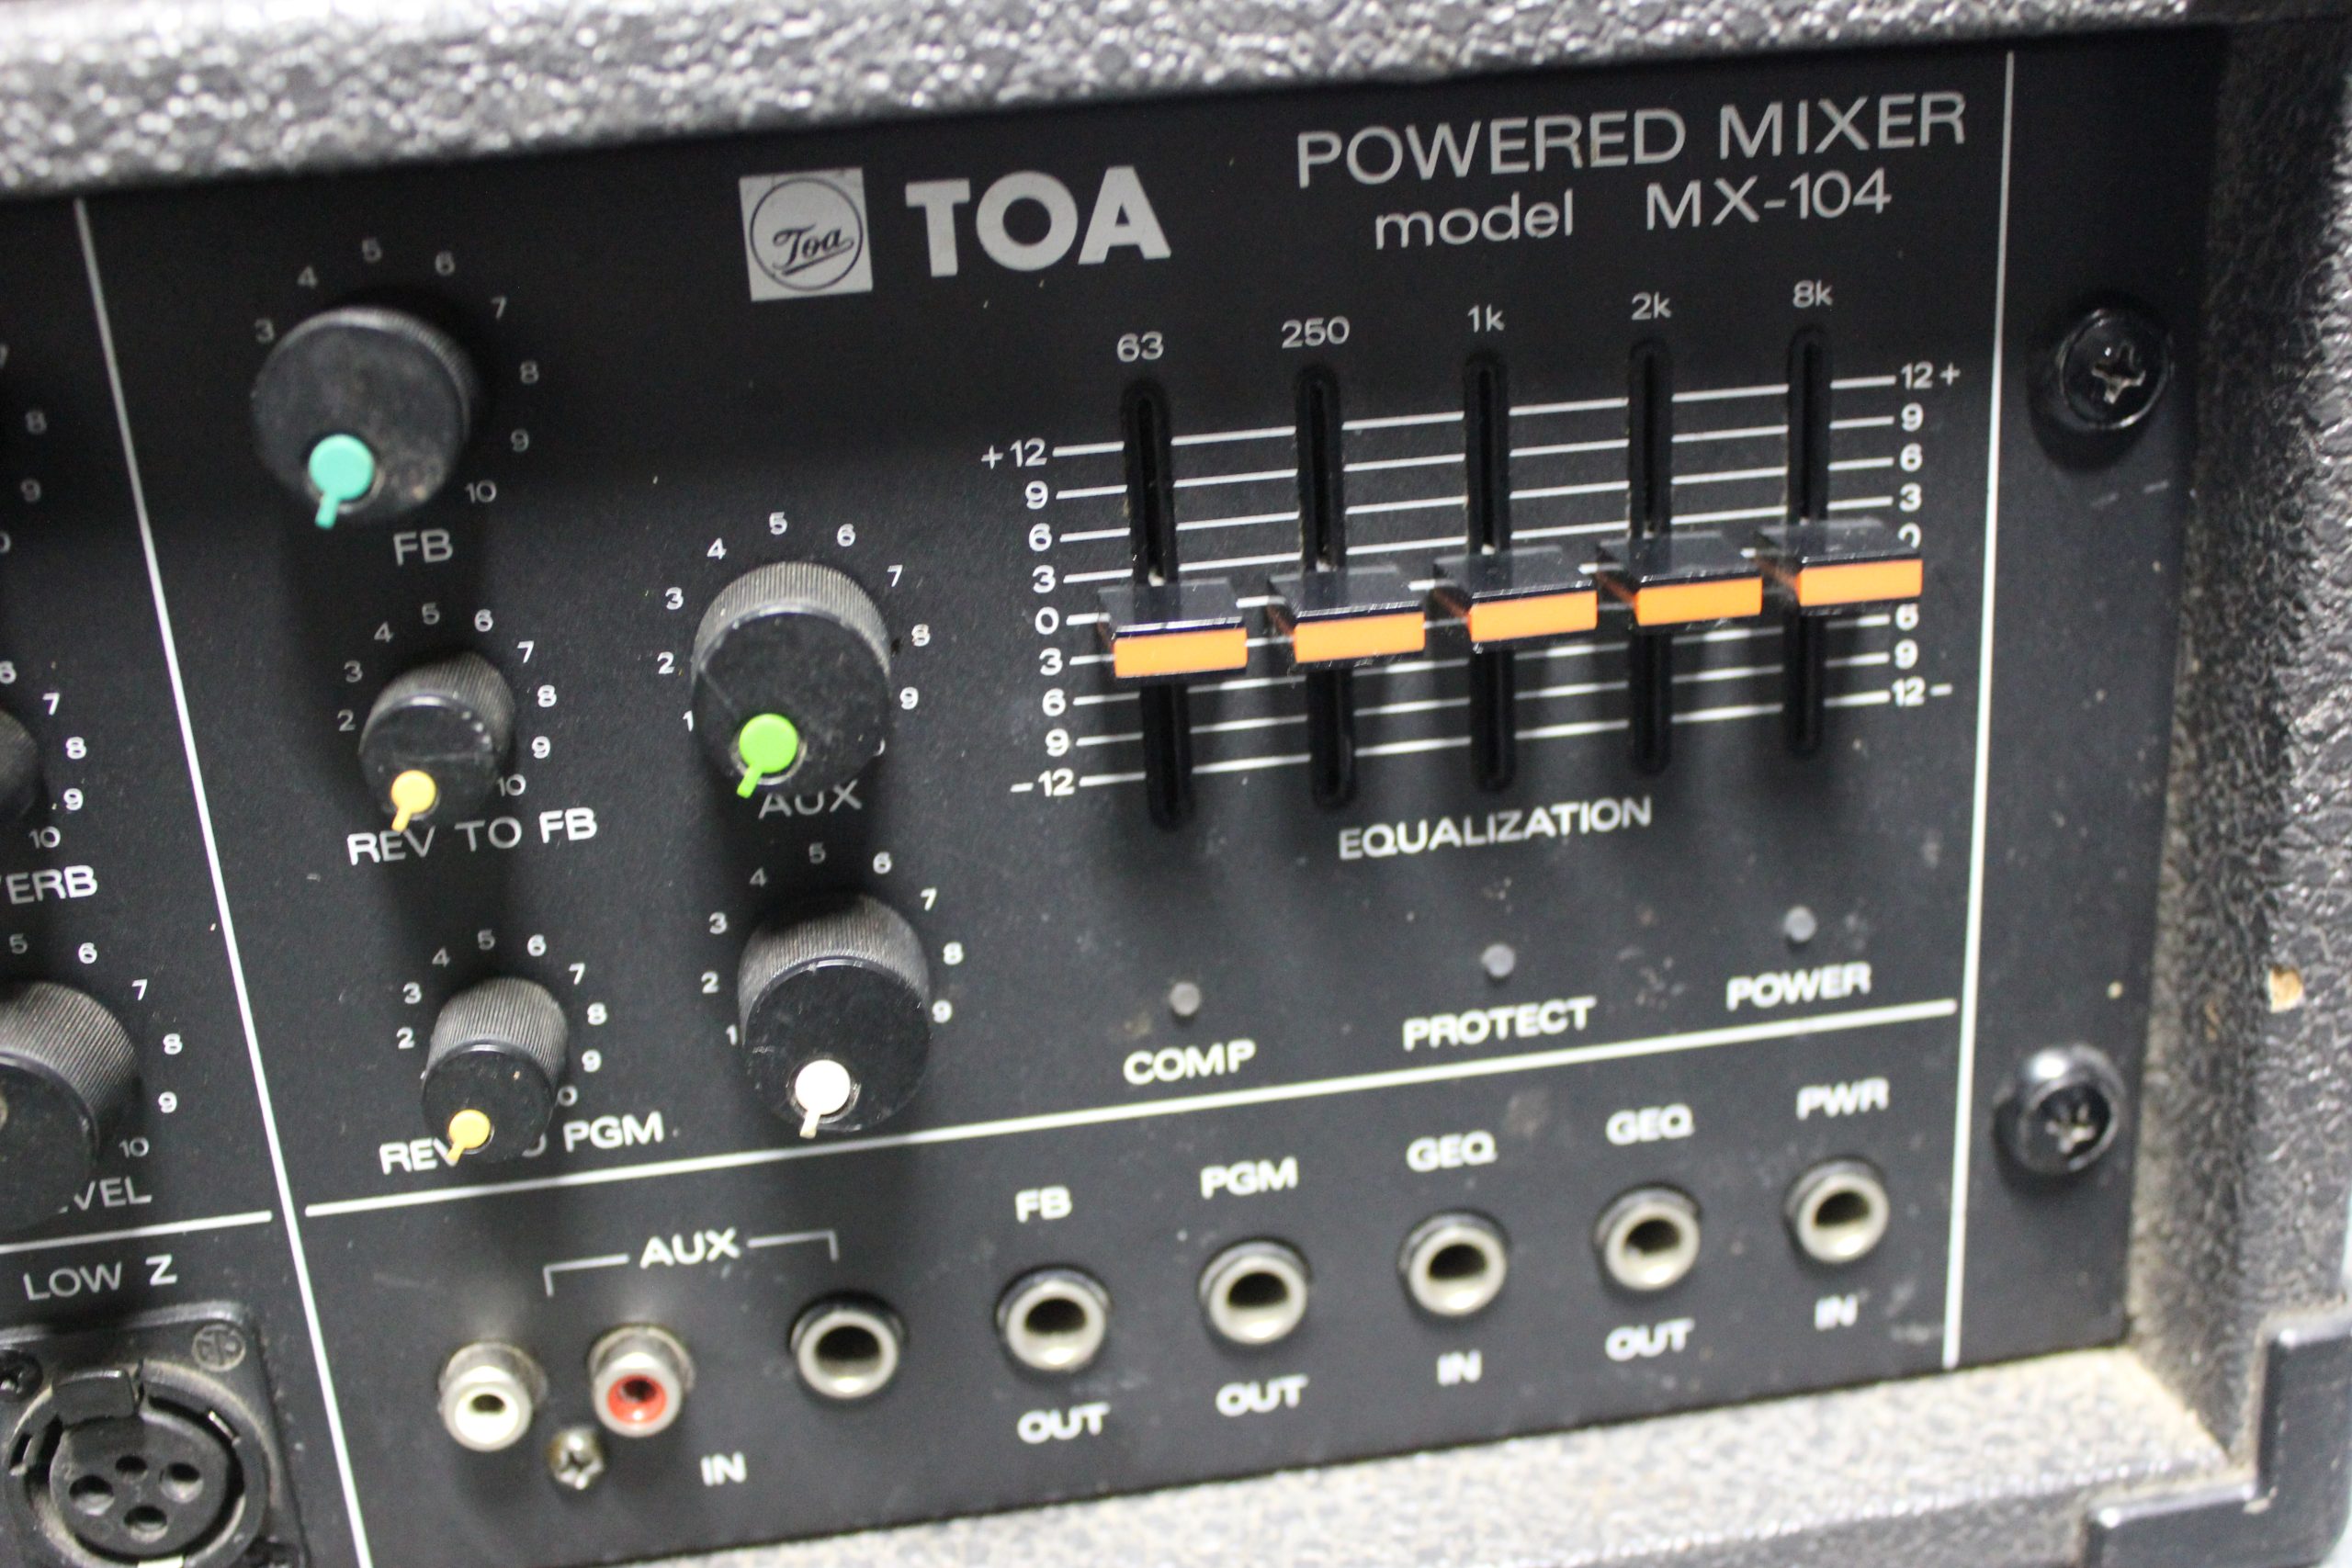 TOA MX 104/4 Channel Powered Mixer-150 Watts @ 4 Ohms